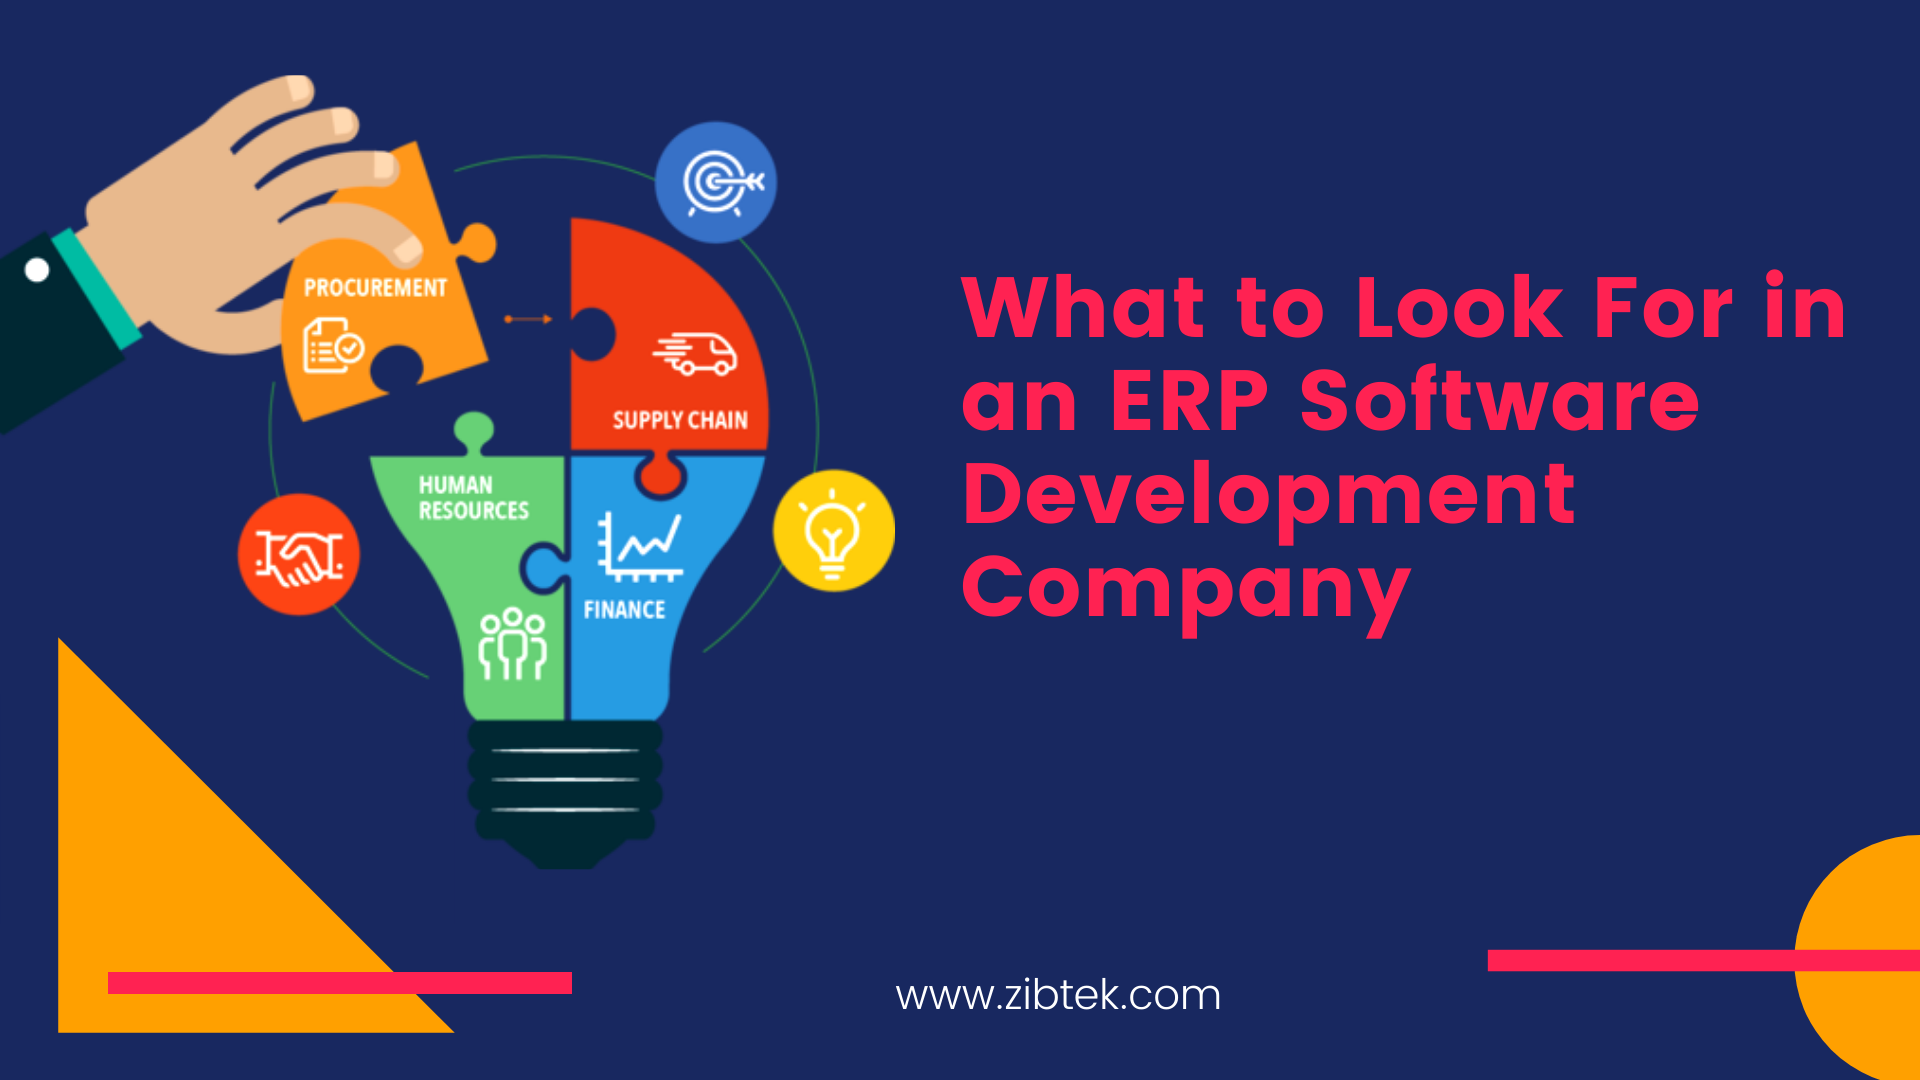 What to Look For in an ERP Software Development Company